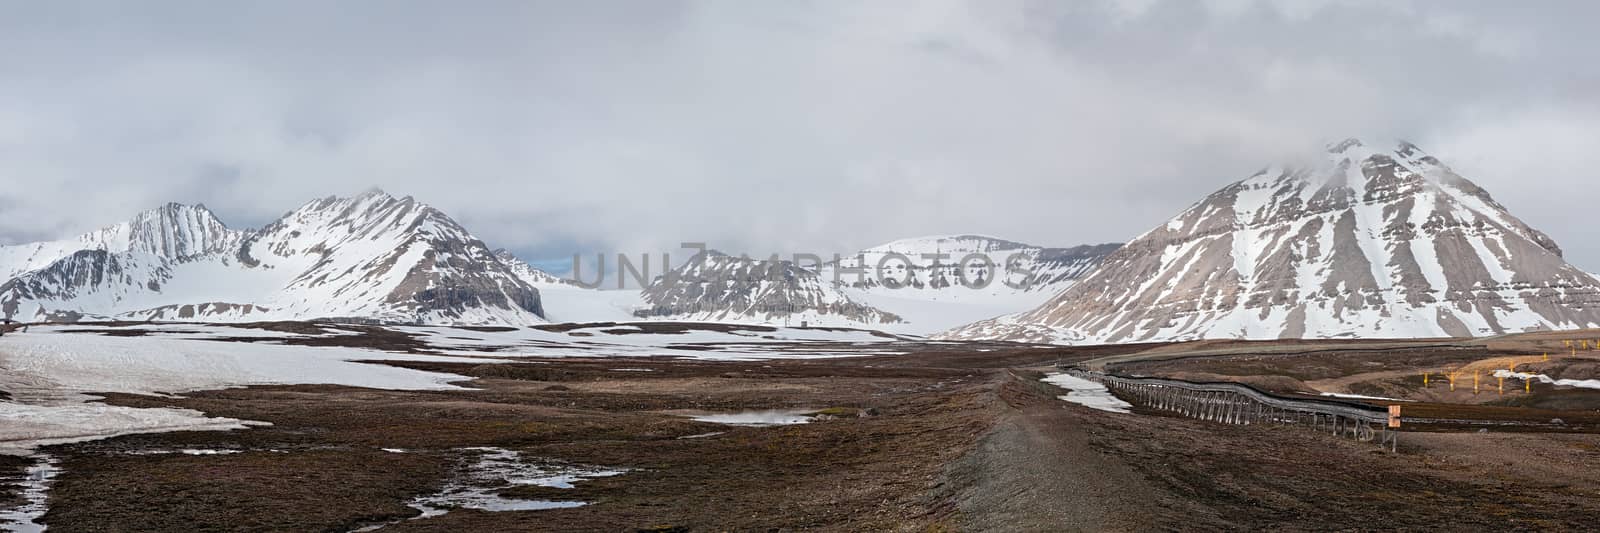 Panoramic mountain landscape in Ny Alesund, Svalbard islands, Norway